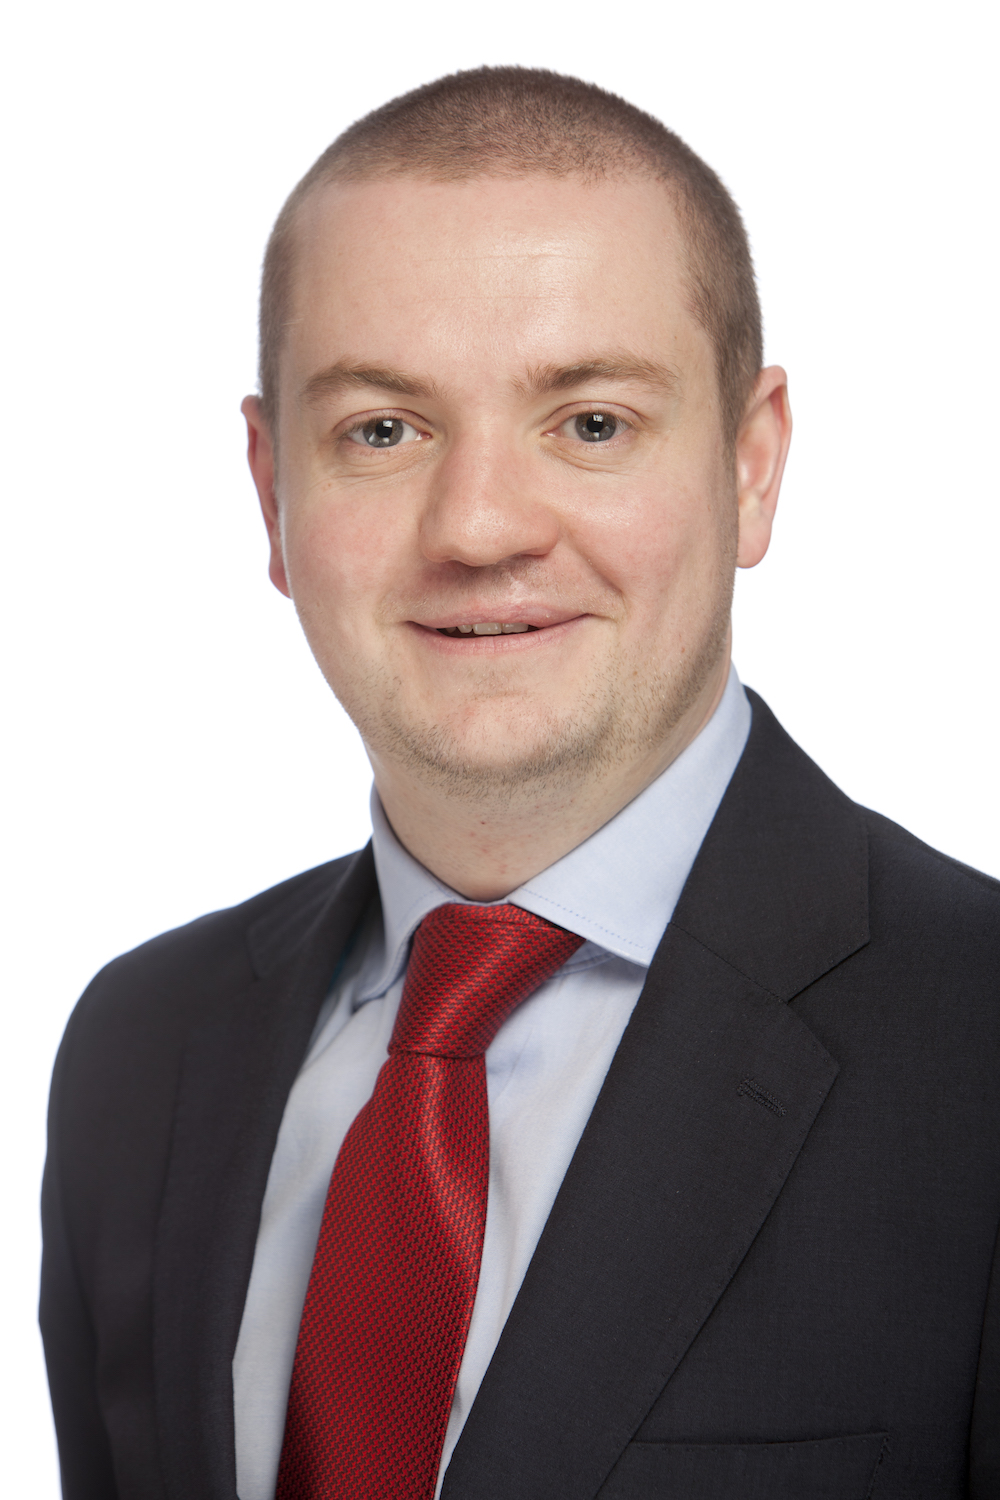 New director joins JLL Glasgow rating team